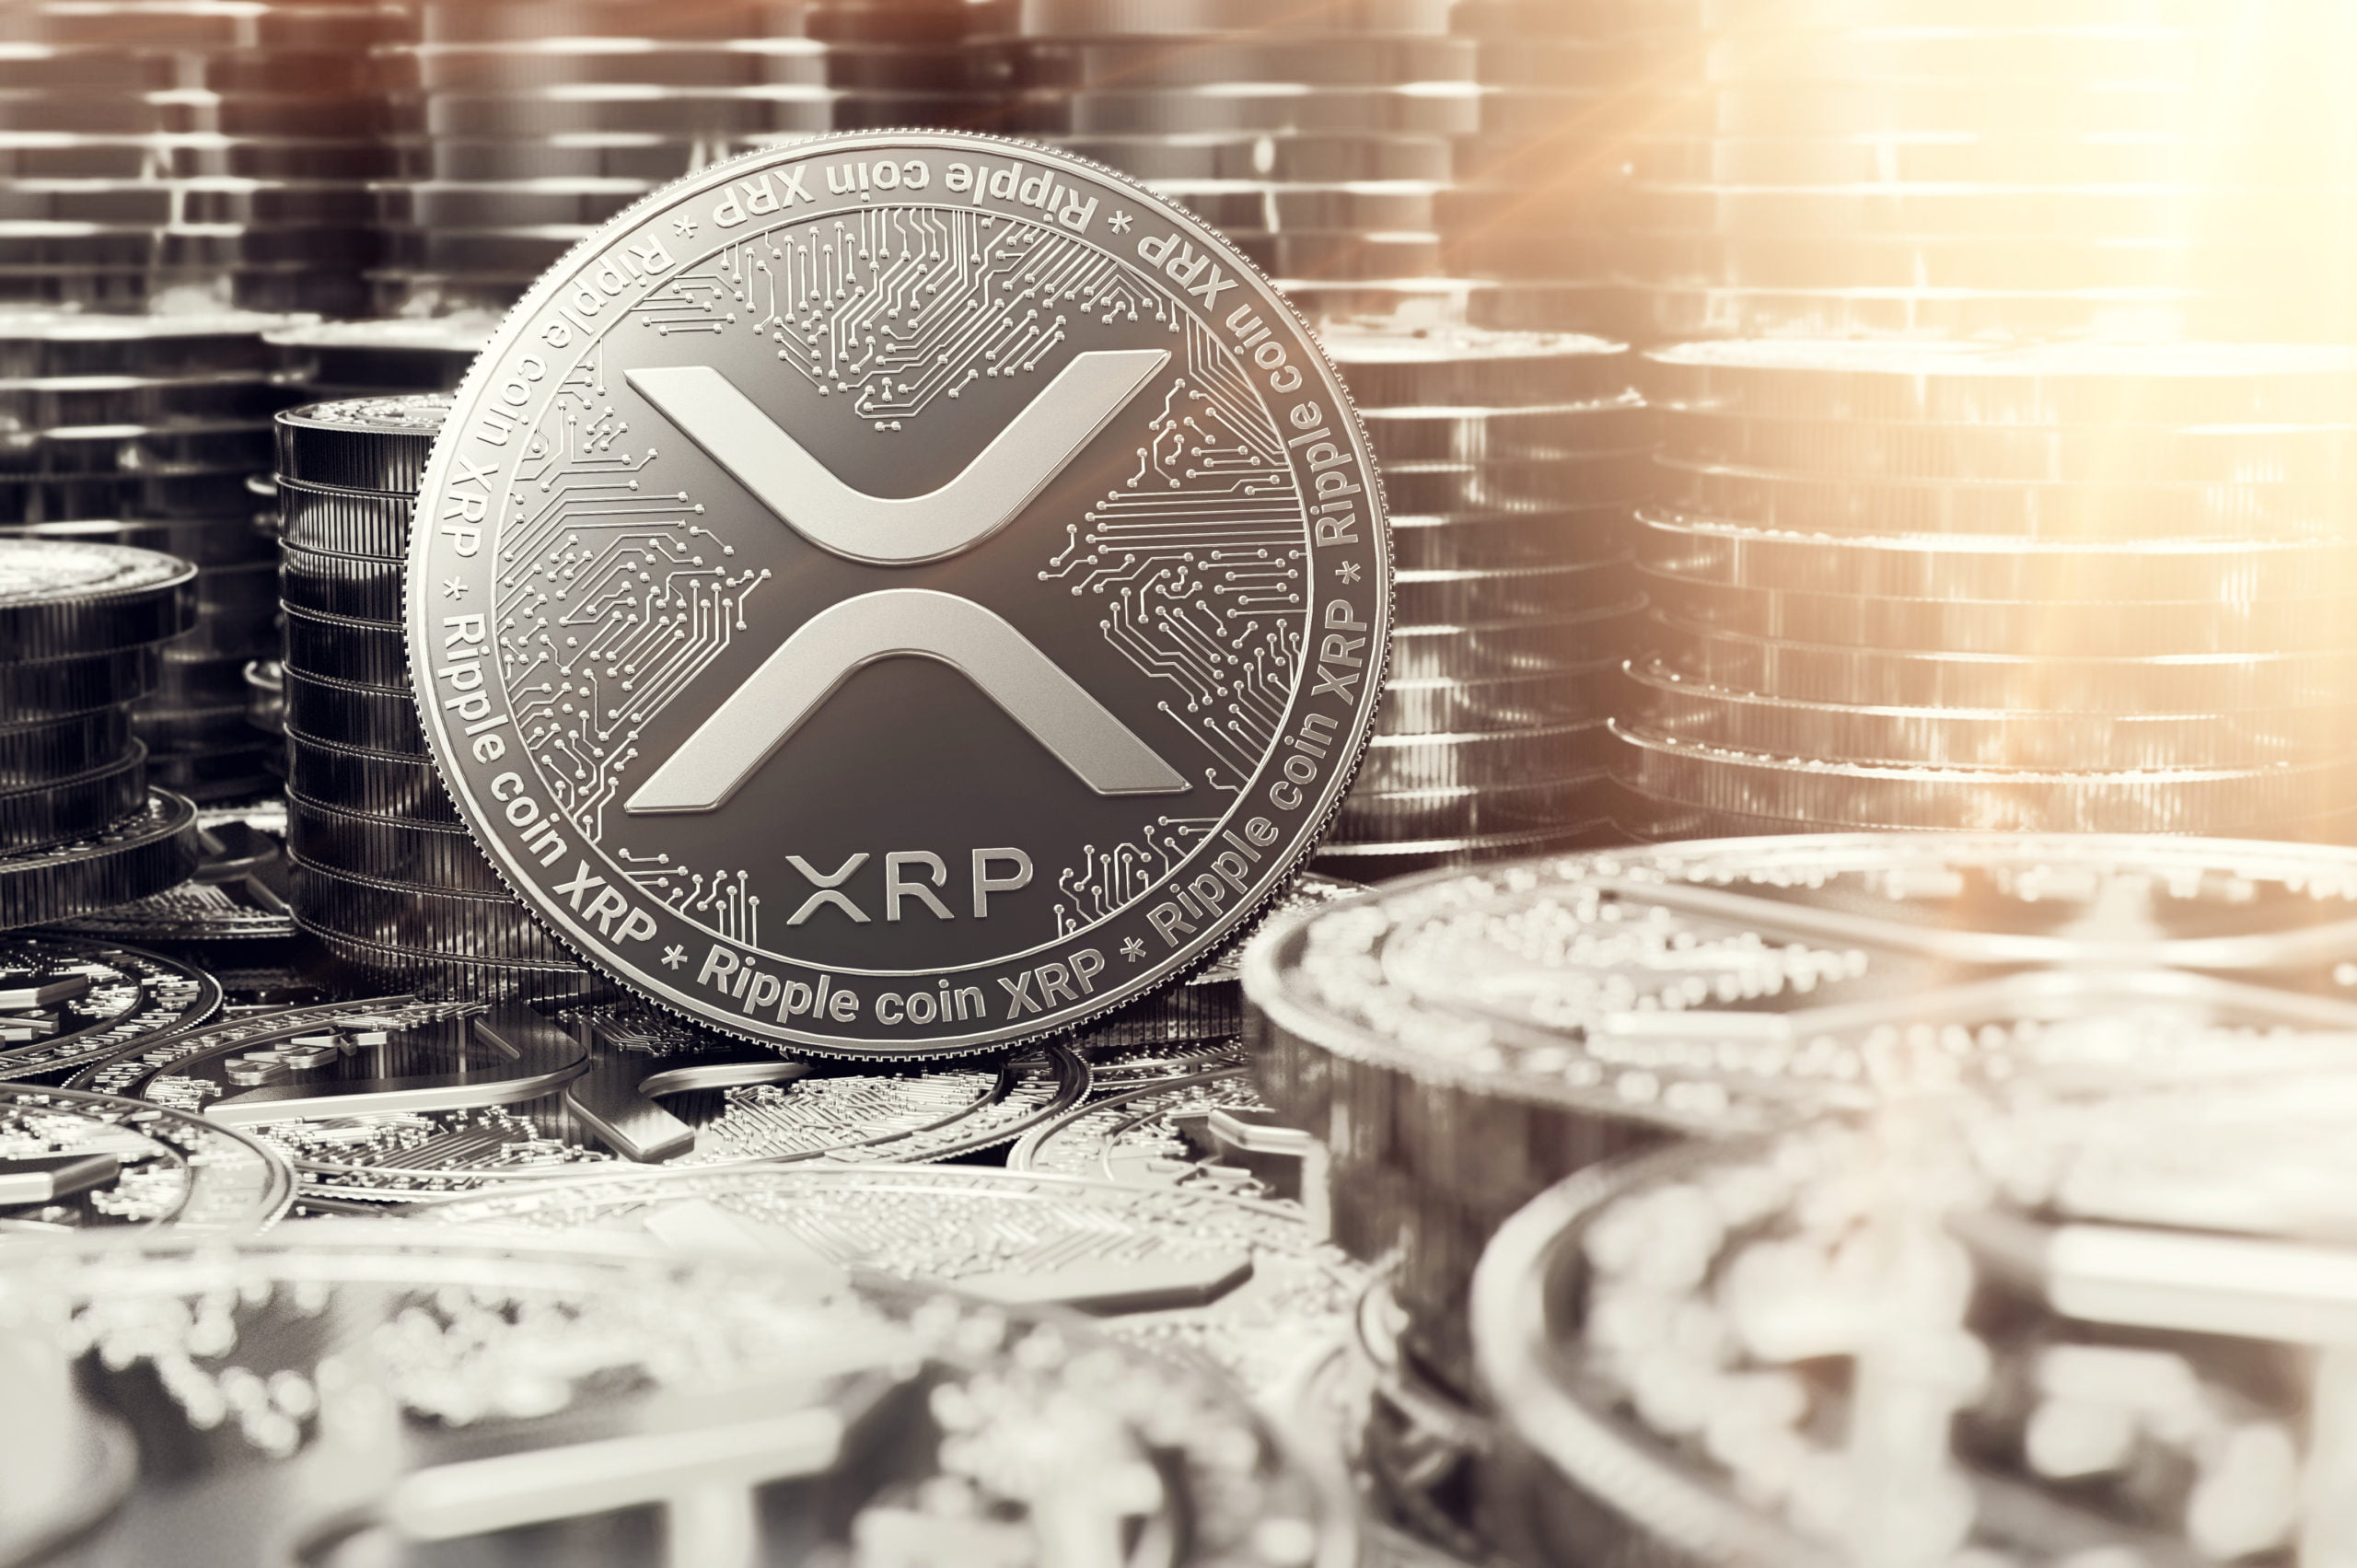 Analyst: Ripple Distribution Almost Complete, XRP Mark Down Could Follow